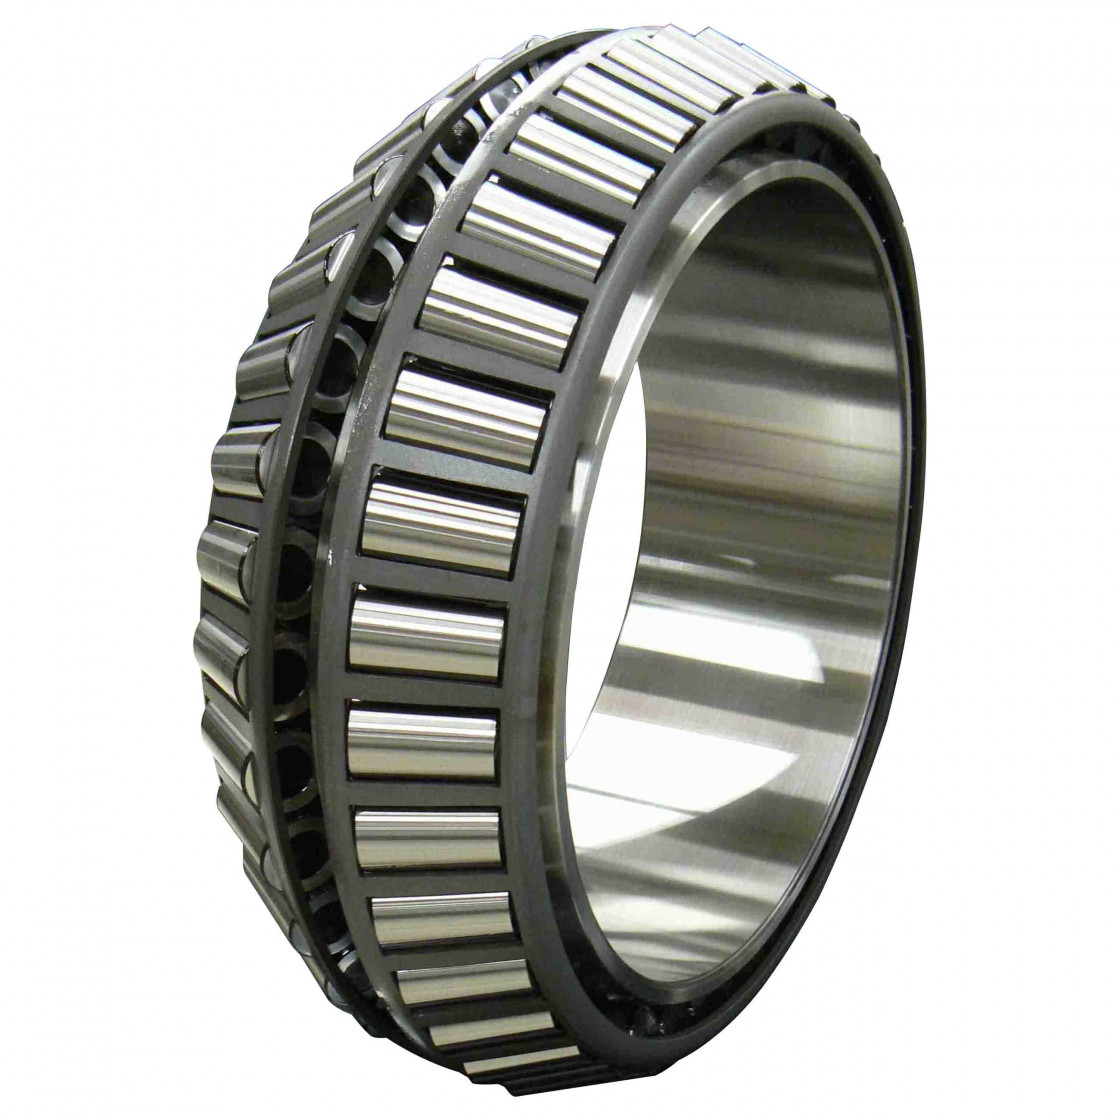 Introduction to the use of tapered roller bearings